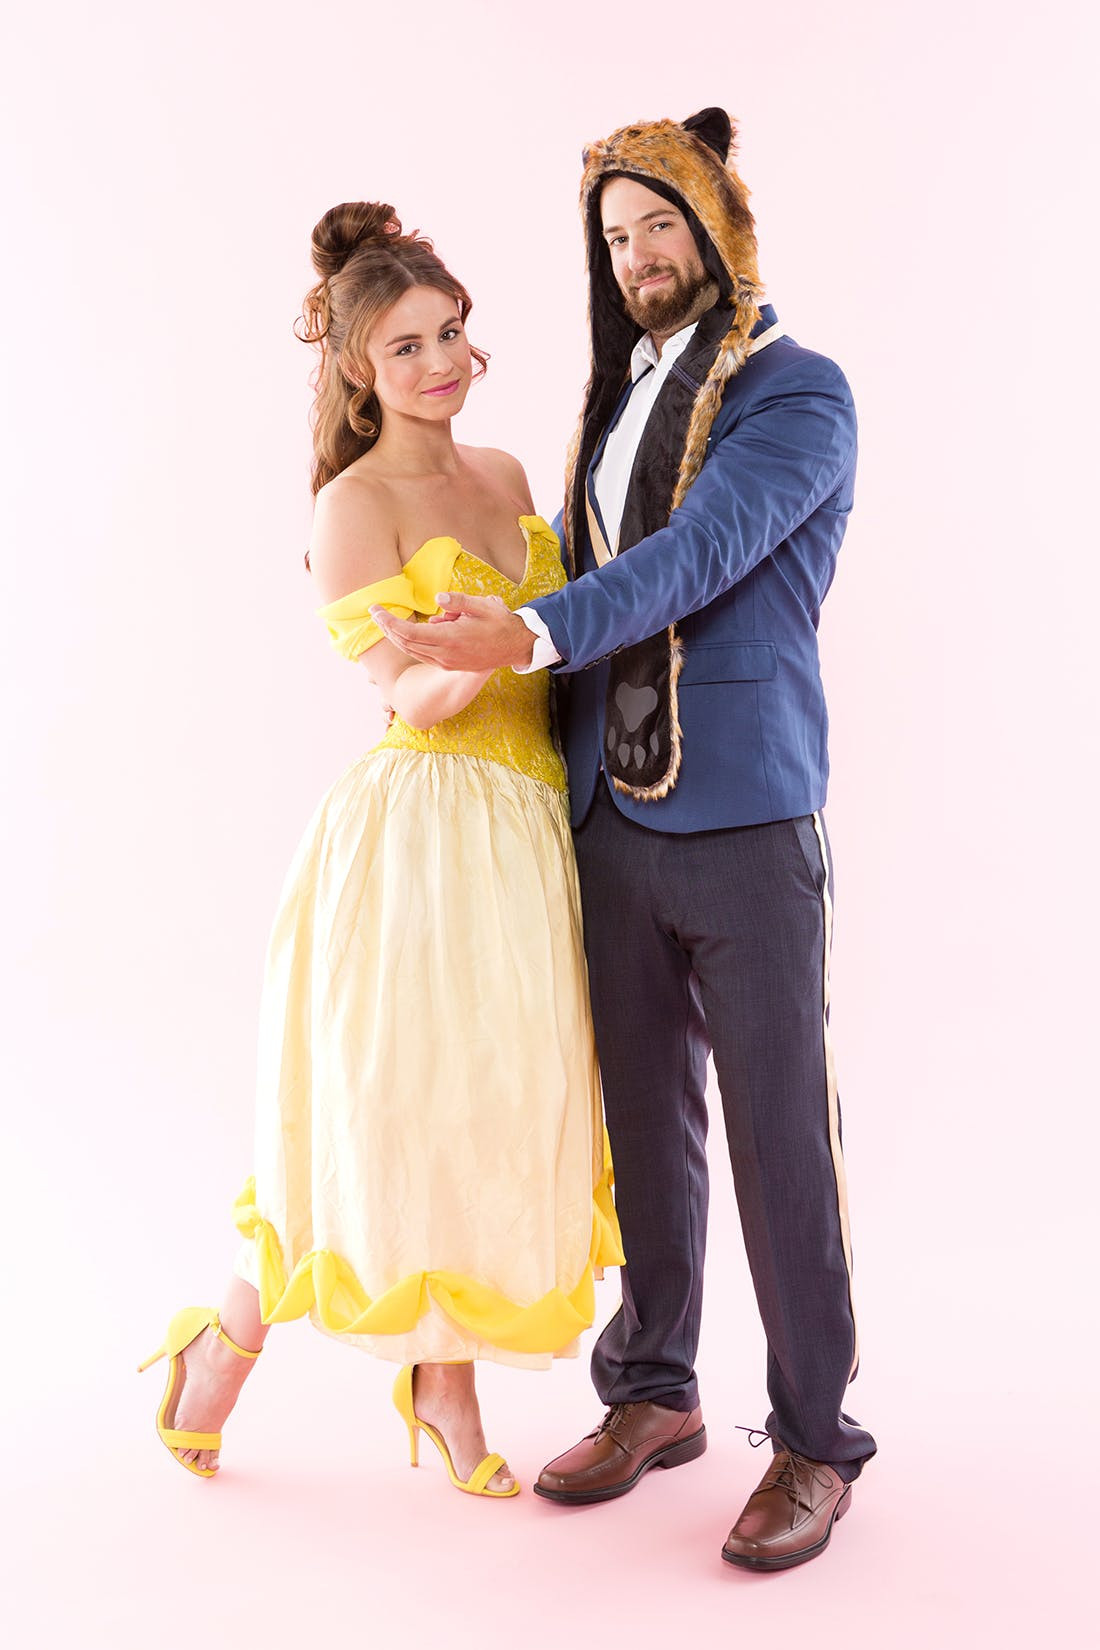 Beauty And The Beast DIY Costumes
 Wear This Beauty and the Beast Couples Costume for an